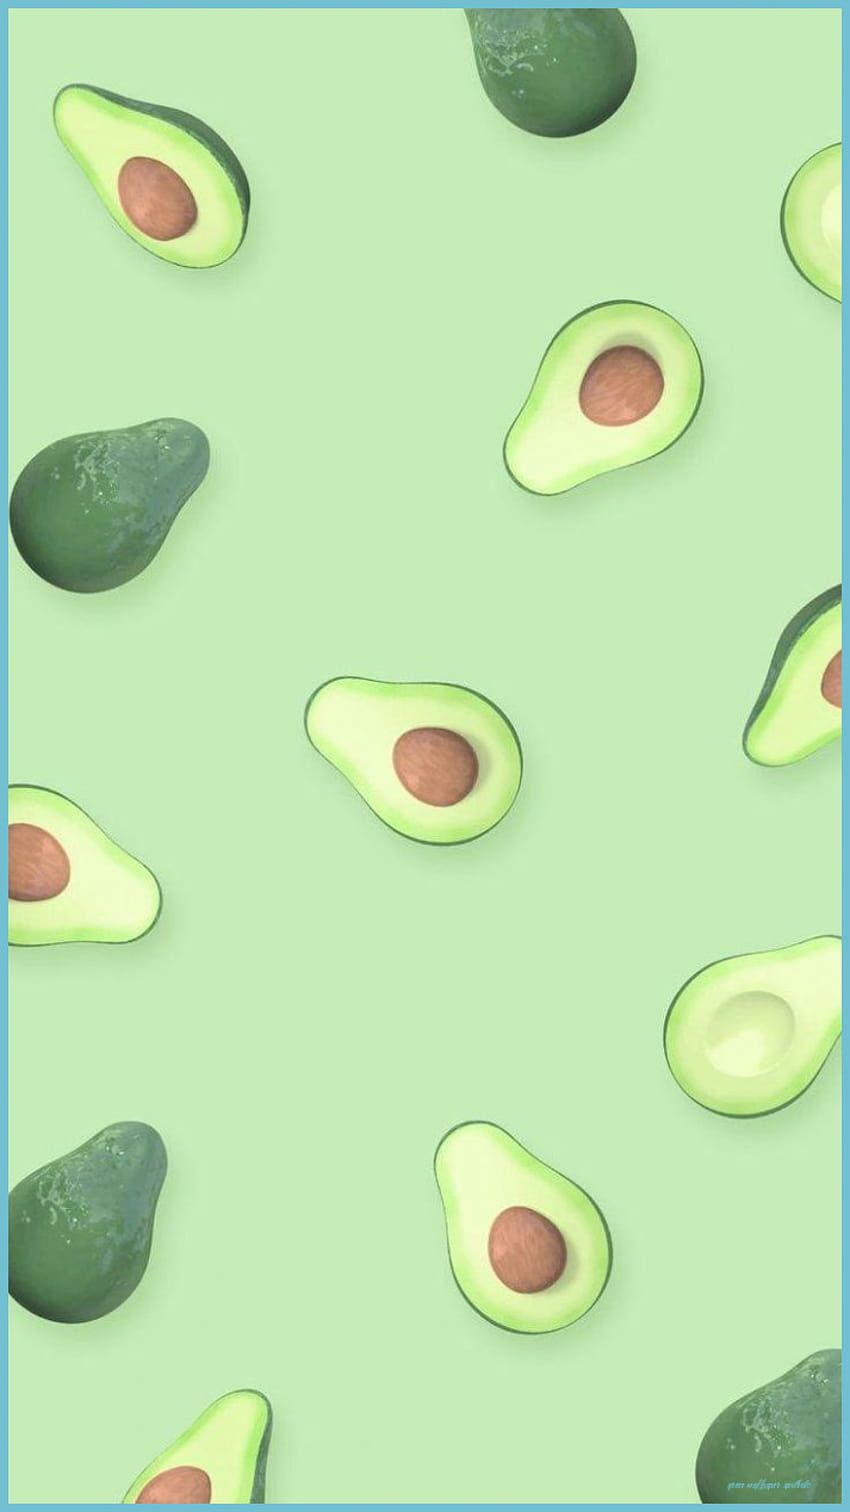 Wallpaper with avocado pattern in the middle, cute backgrounds, green background - Soft green